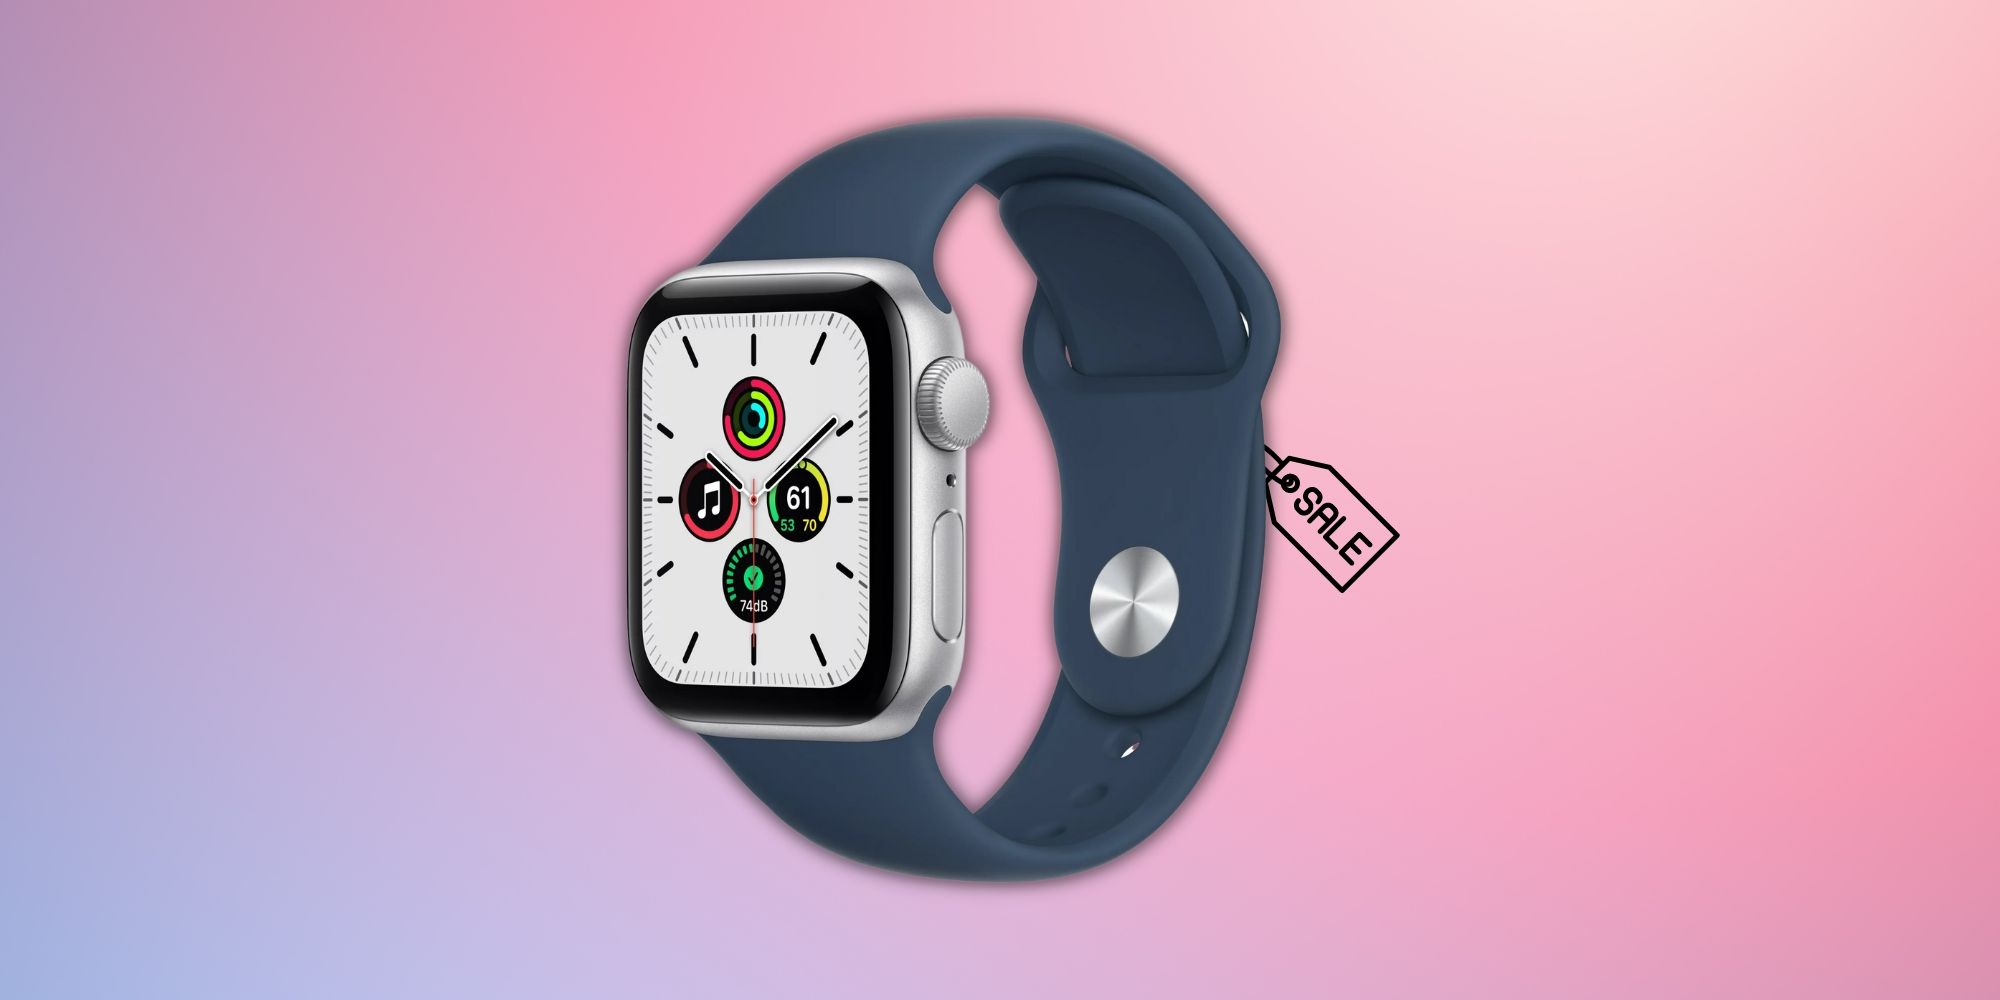 Image of the Apple Watch SE First Generation on a pink-blue gradient background